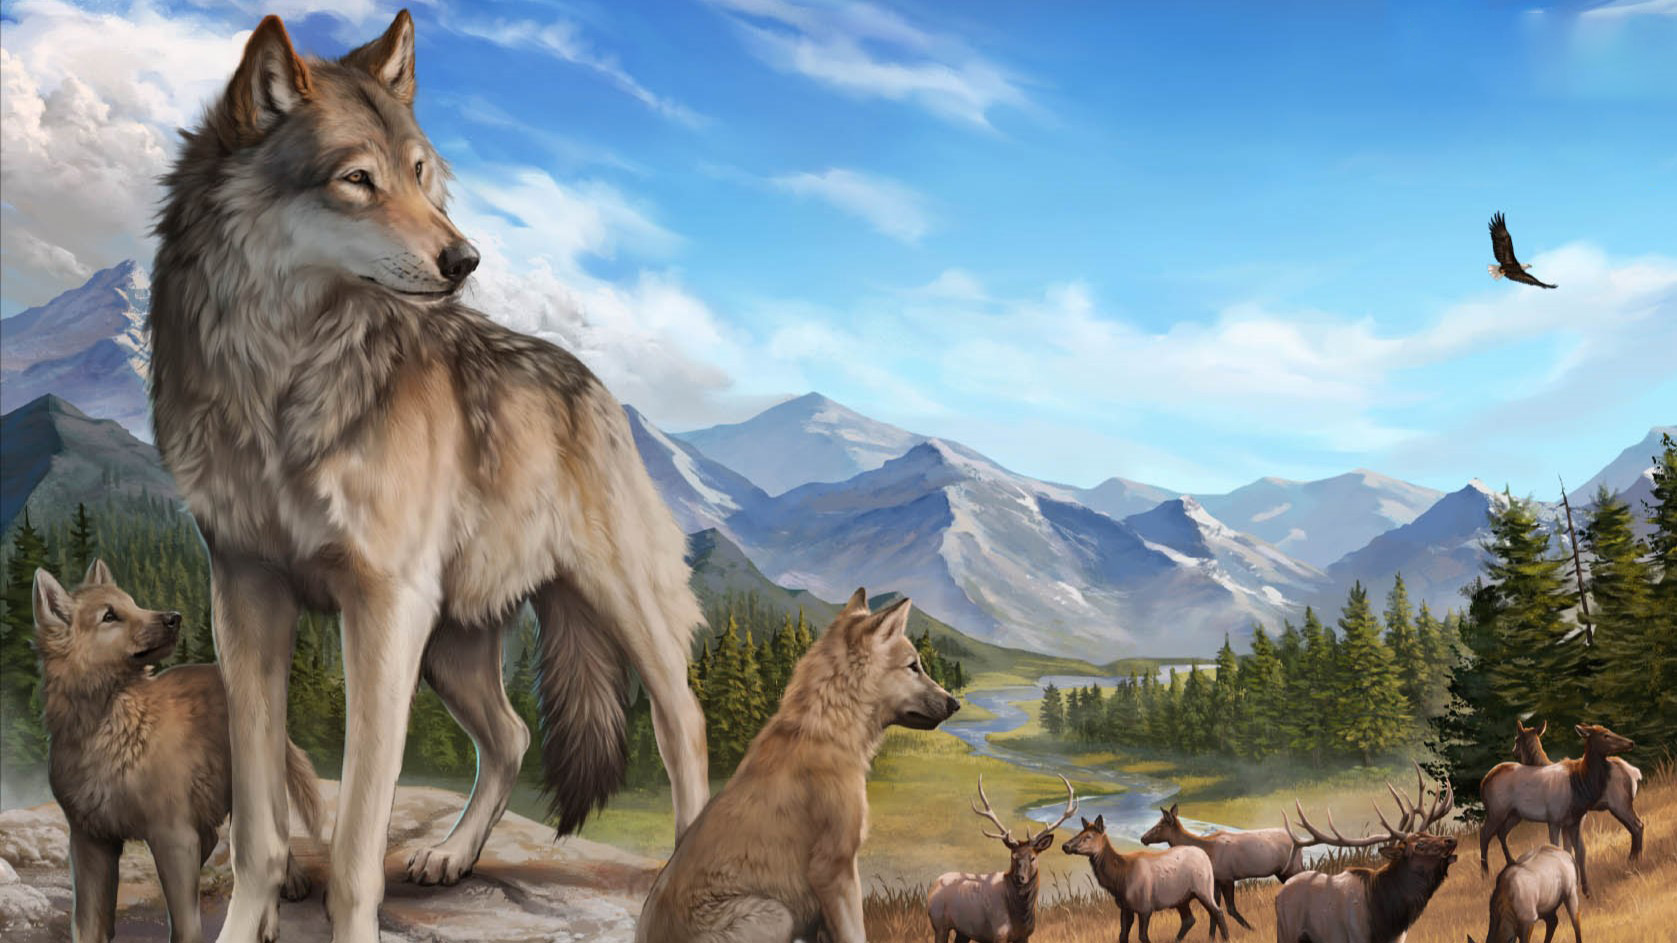  'There aren't 3 new wolf simulation games coming out every month': 17 years in, this multiplayer wolf edutainment game from the Minnesota Zoo has an improbably loyal fandom keeping it alive 